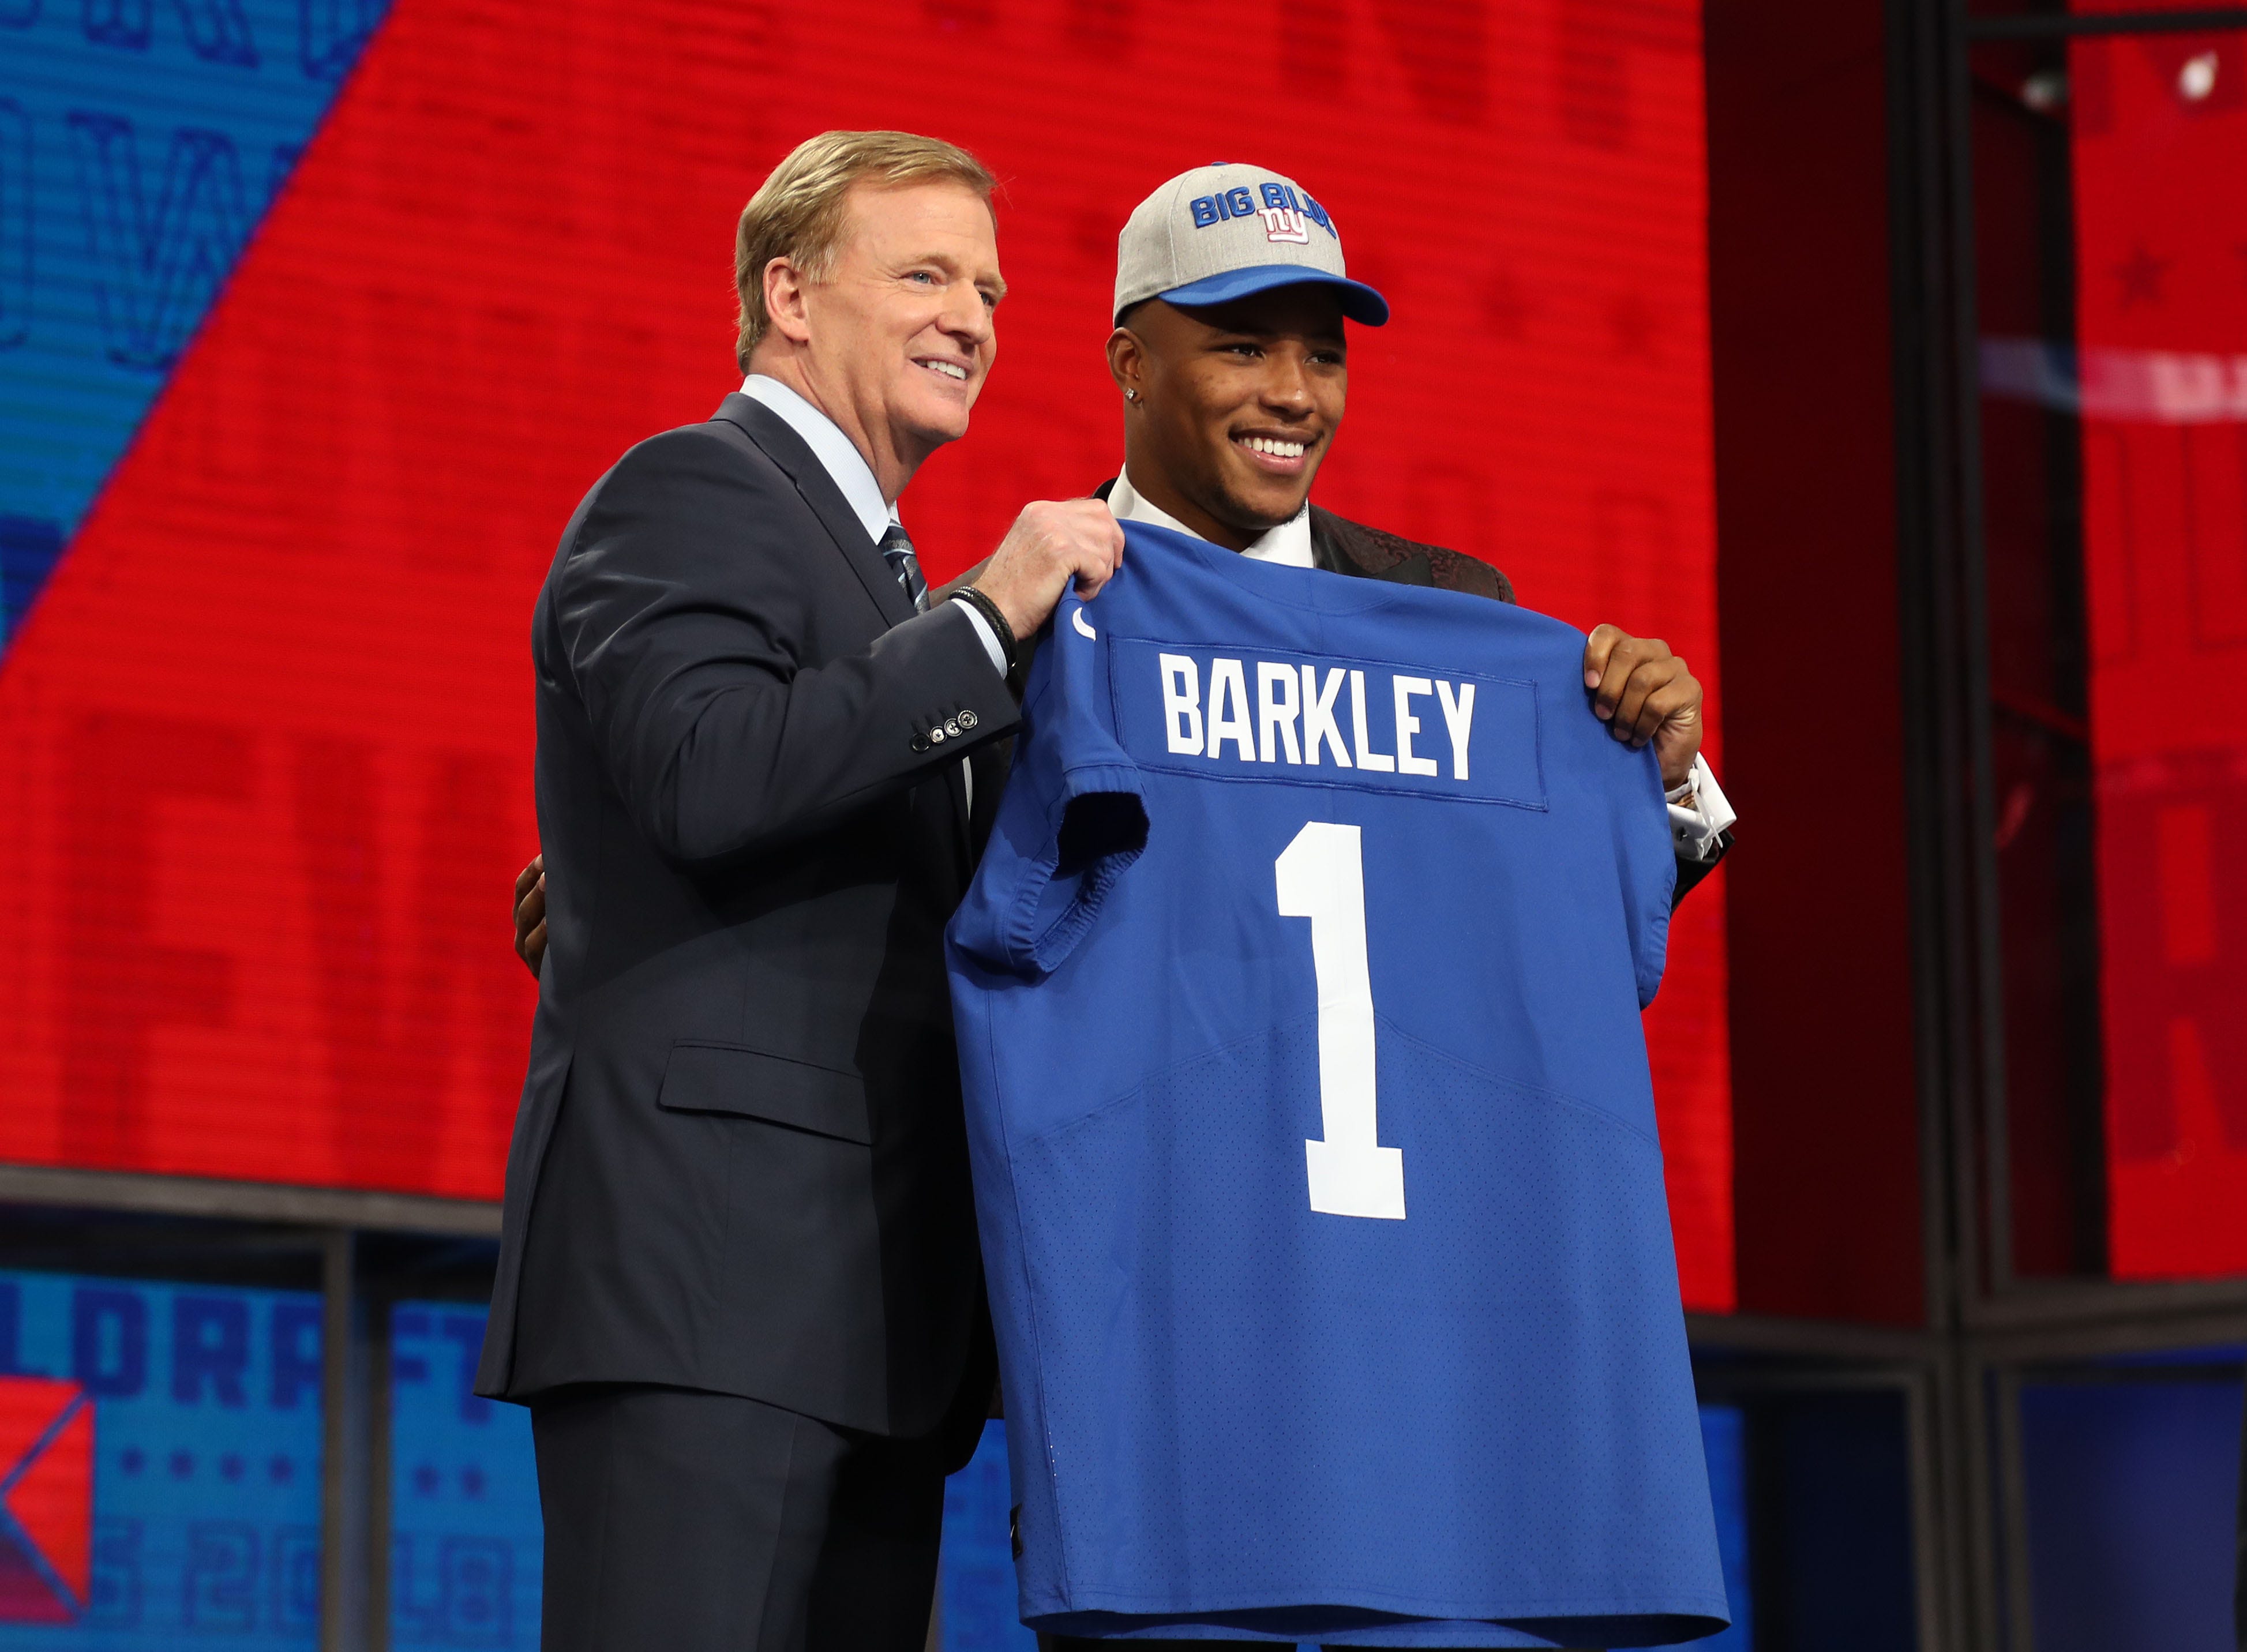 Saquon Barkley is selected as the number two overall pick to the New York Giants in the first round of the 2018 NFL Draft at AT&T Stadium in Arlington, Texas.